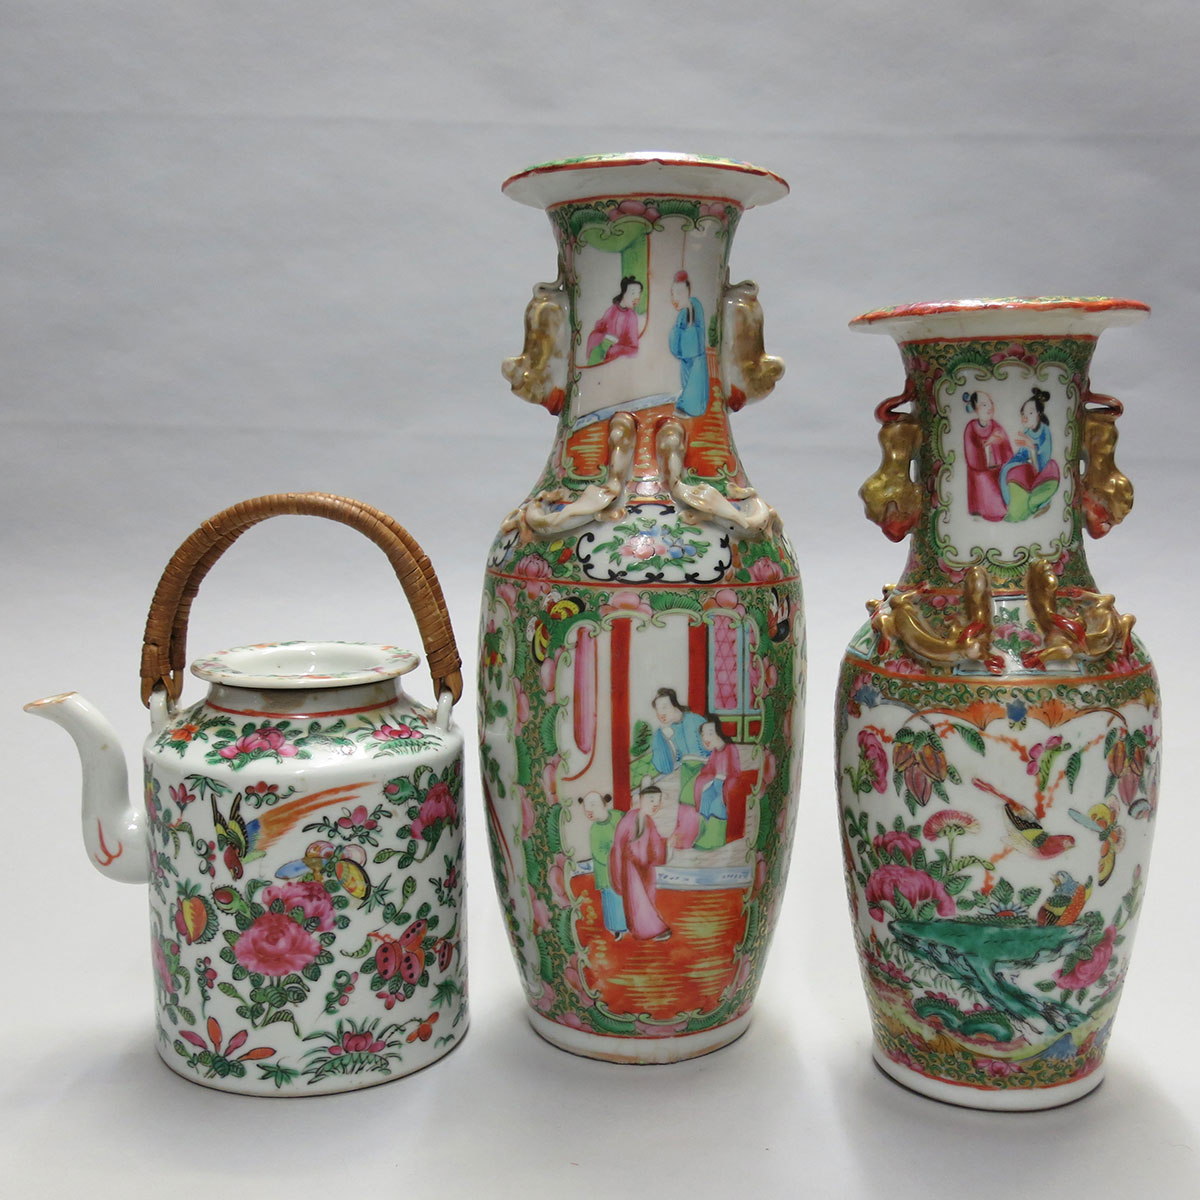 Two Export Canton Rose Baluster Vases, 19th Century